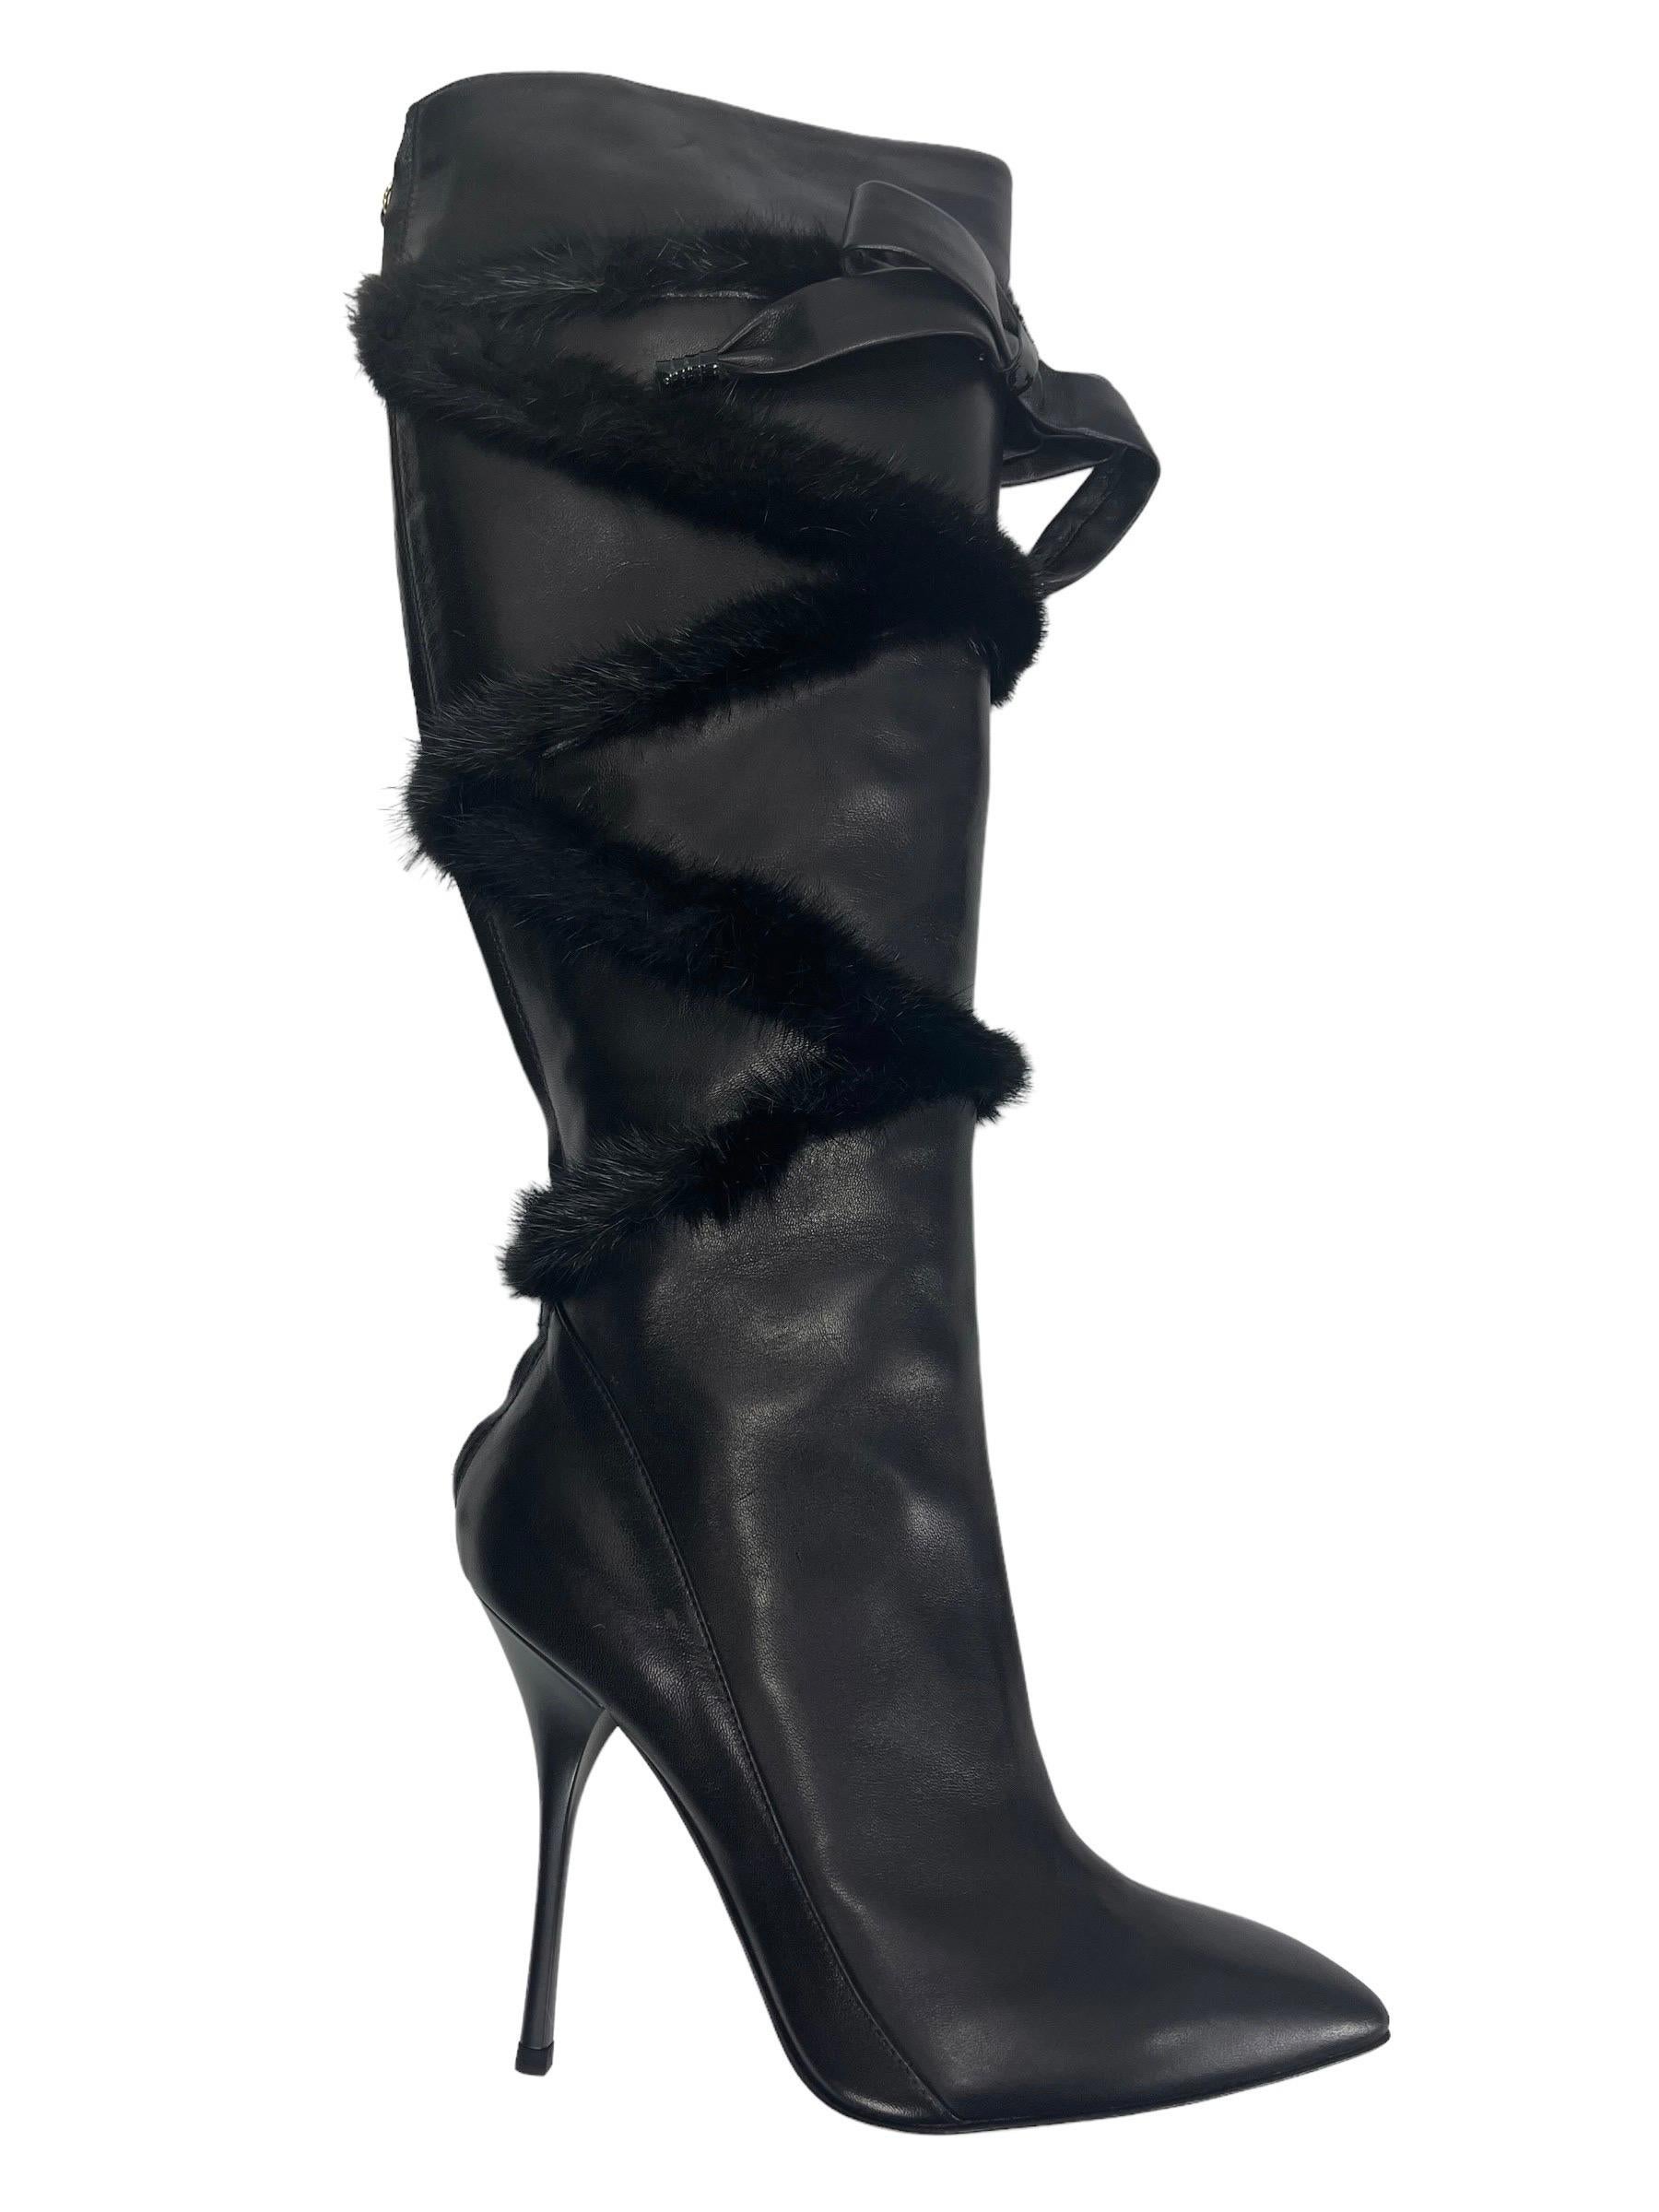 New Roberto Cavalli Black Leather Knee High Boots with Mink Fur It. 37 - US 7 In New Condition For Sale In Montgomery, TX